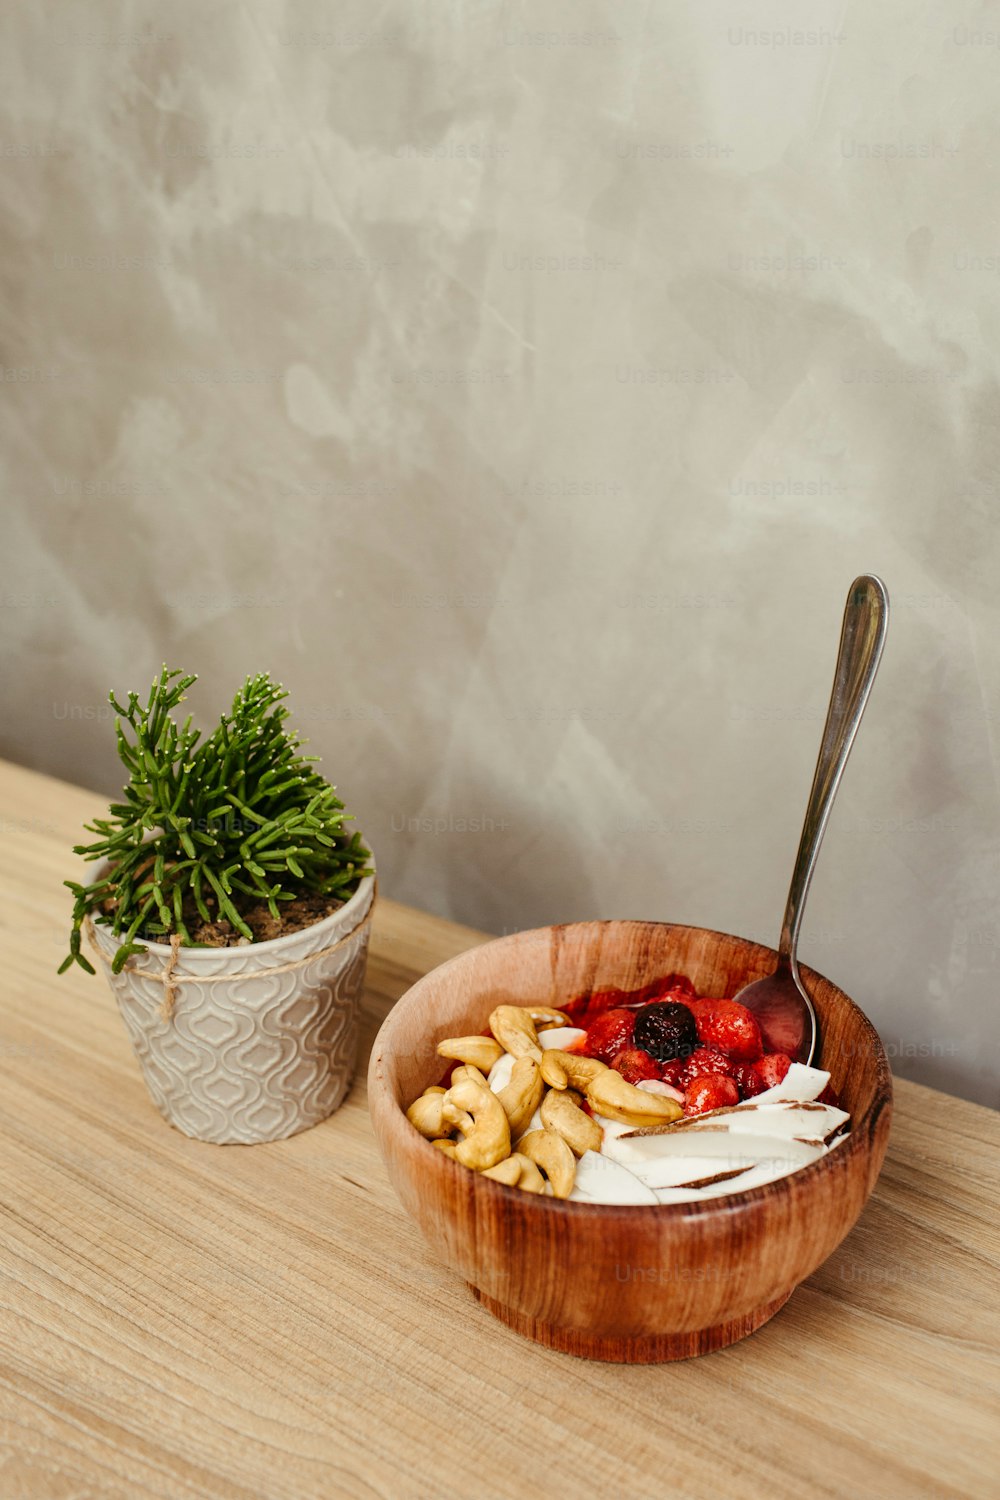 a bowl of food with a spoon next to a potted plant